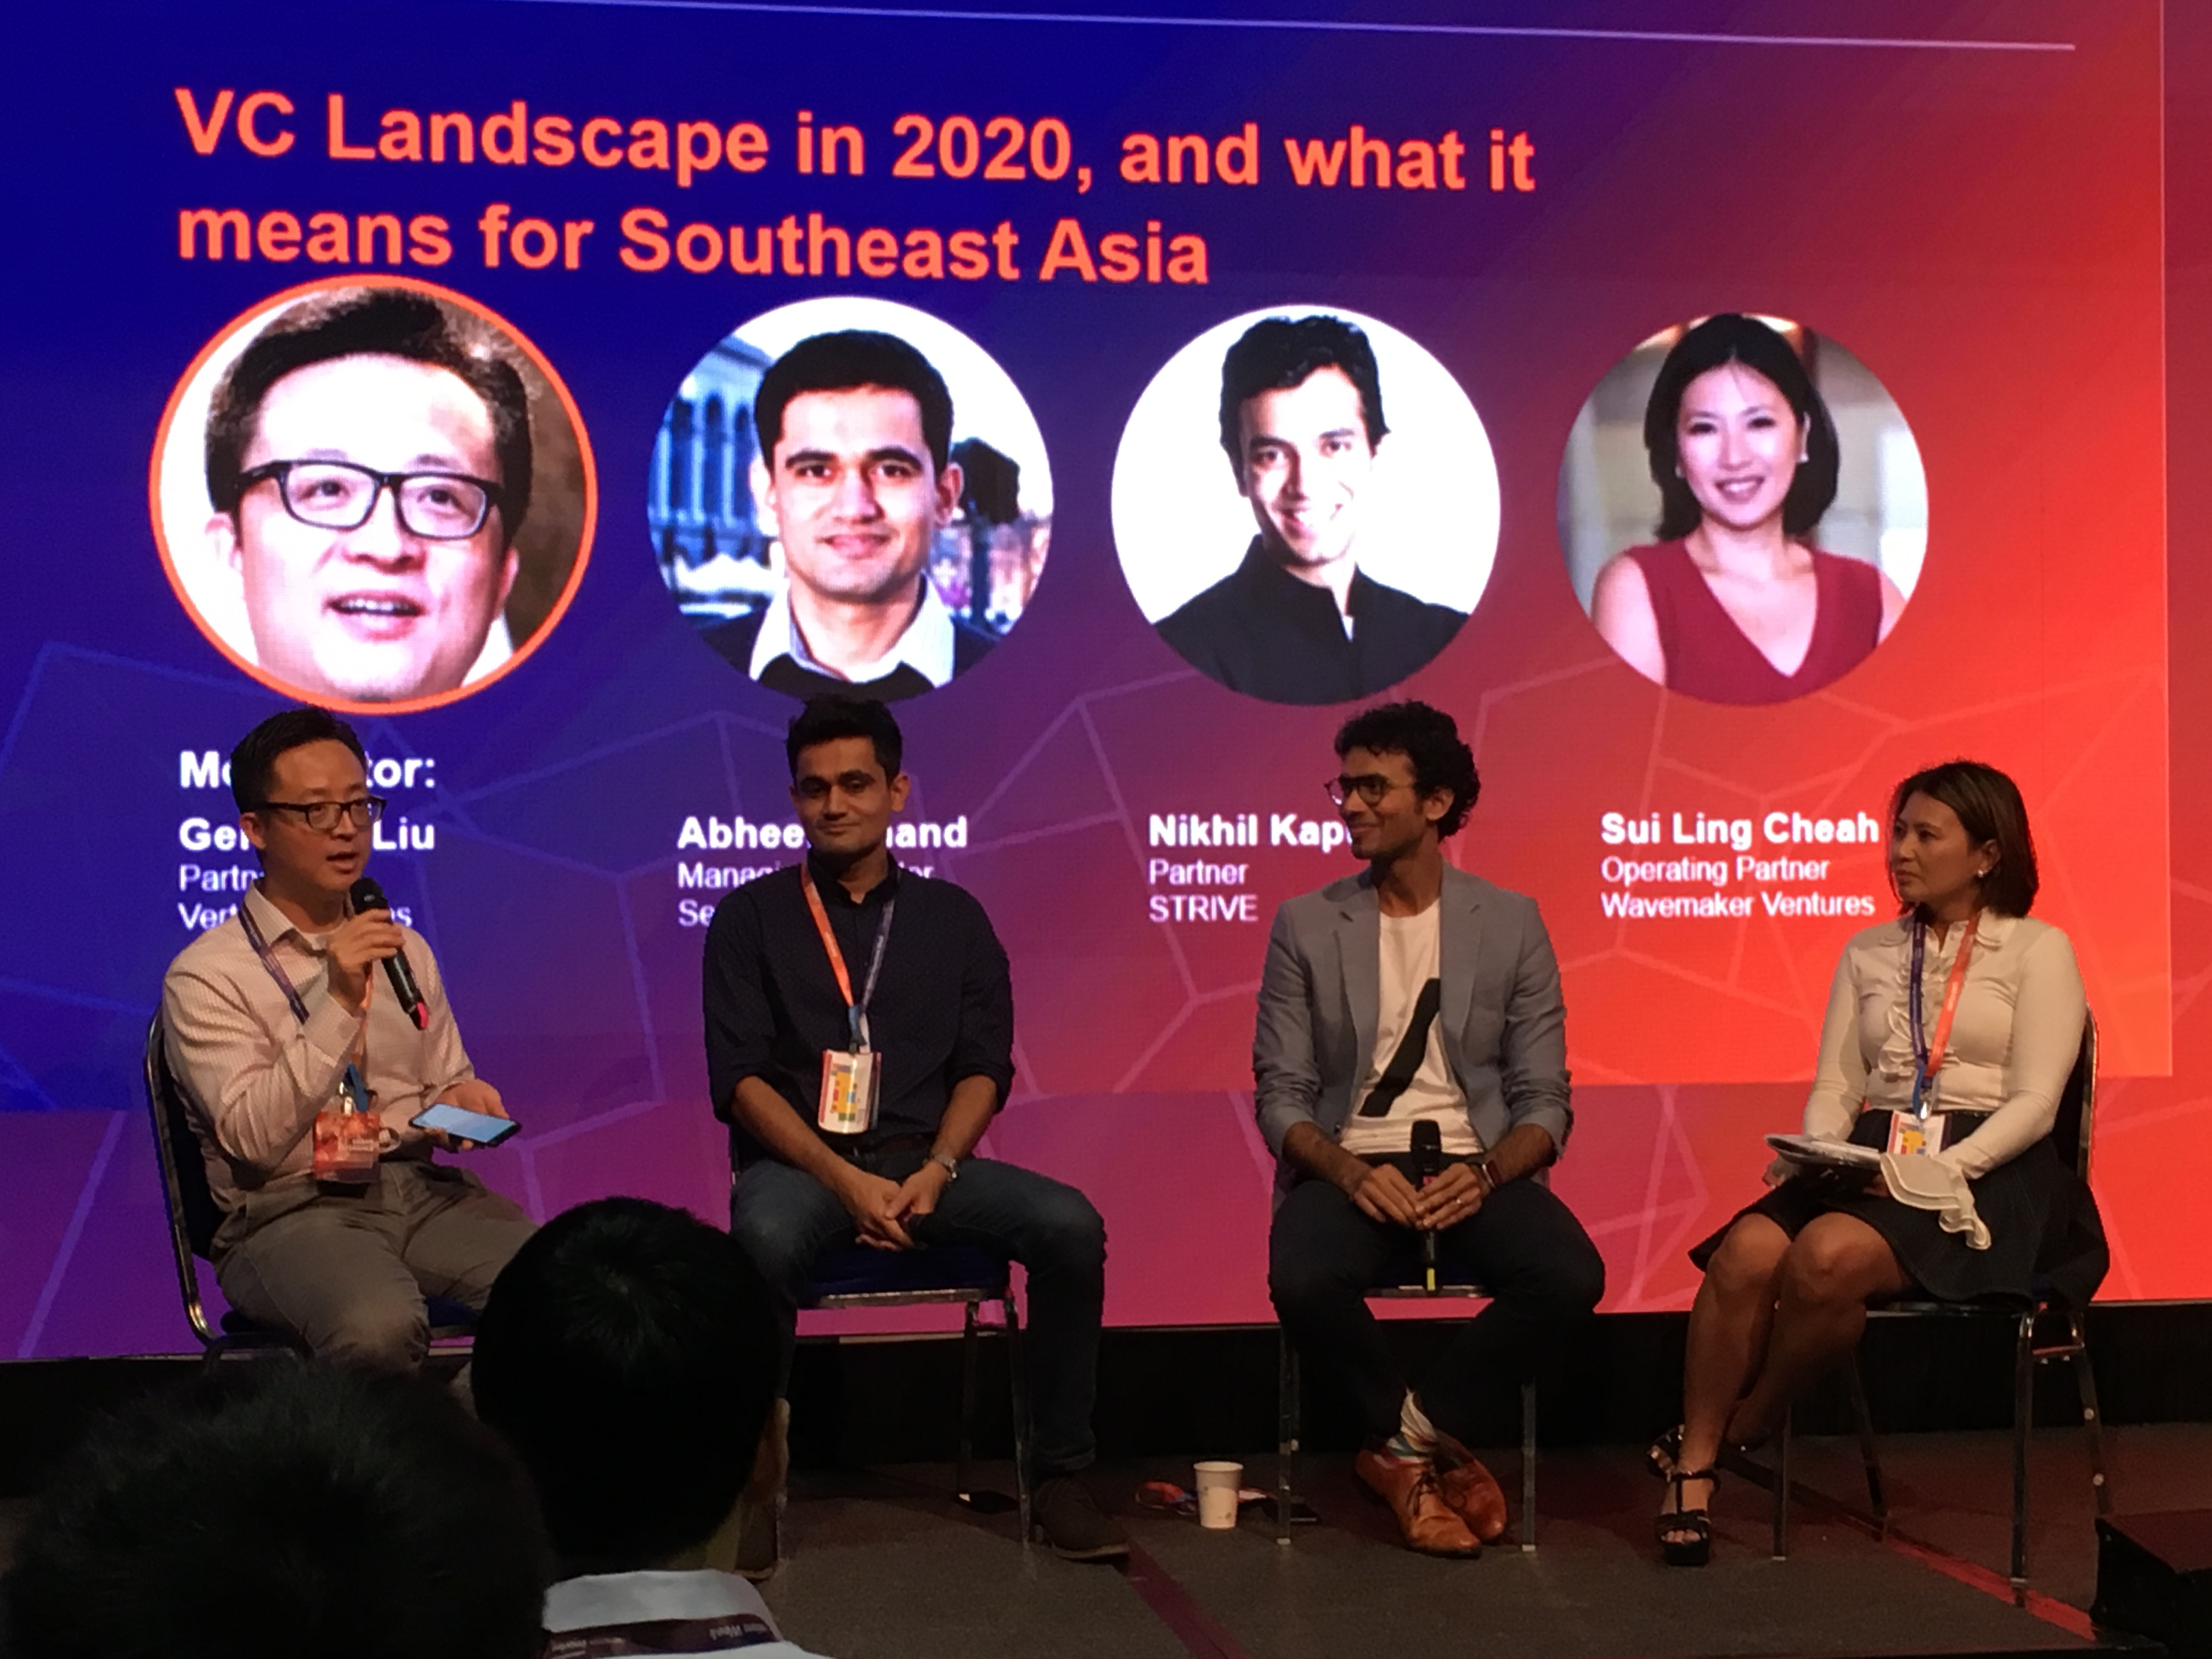 VCs in Southeast Asia offer hands-on support in marketing, recruitment, and legal advice